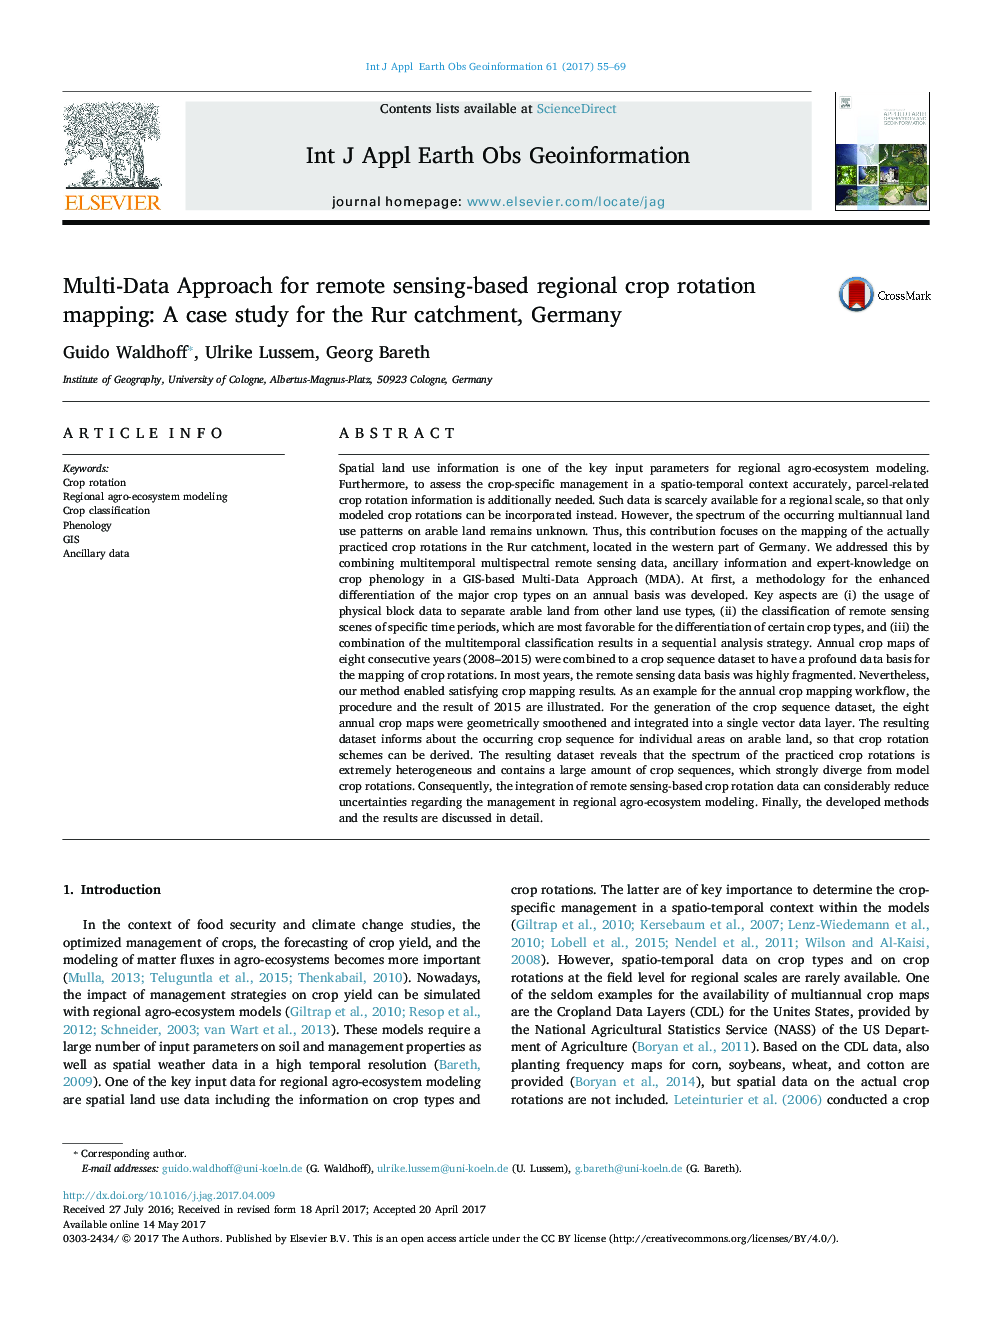 Multi-Data Approach for remote sensing-based regional crop rotation mapping: A case study for the Rur catchment, Germany